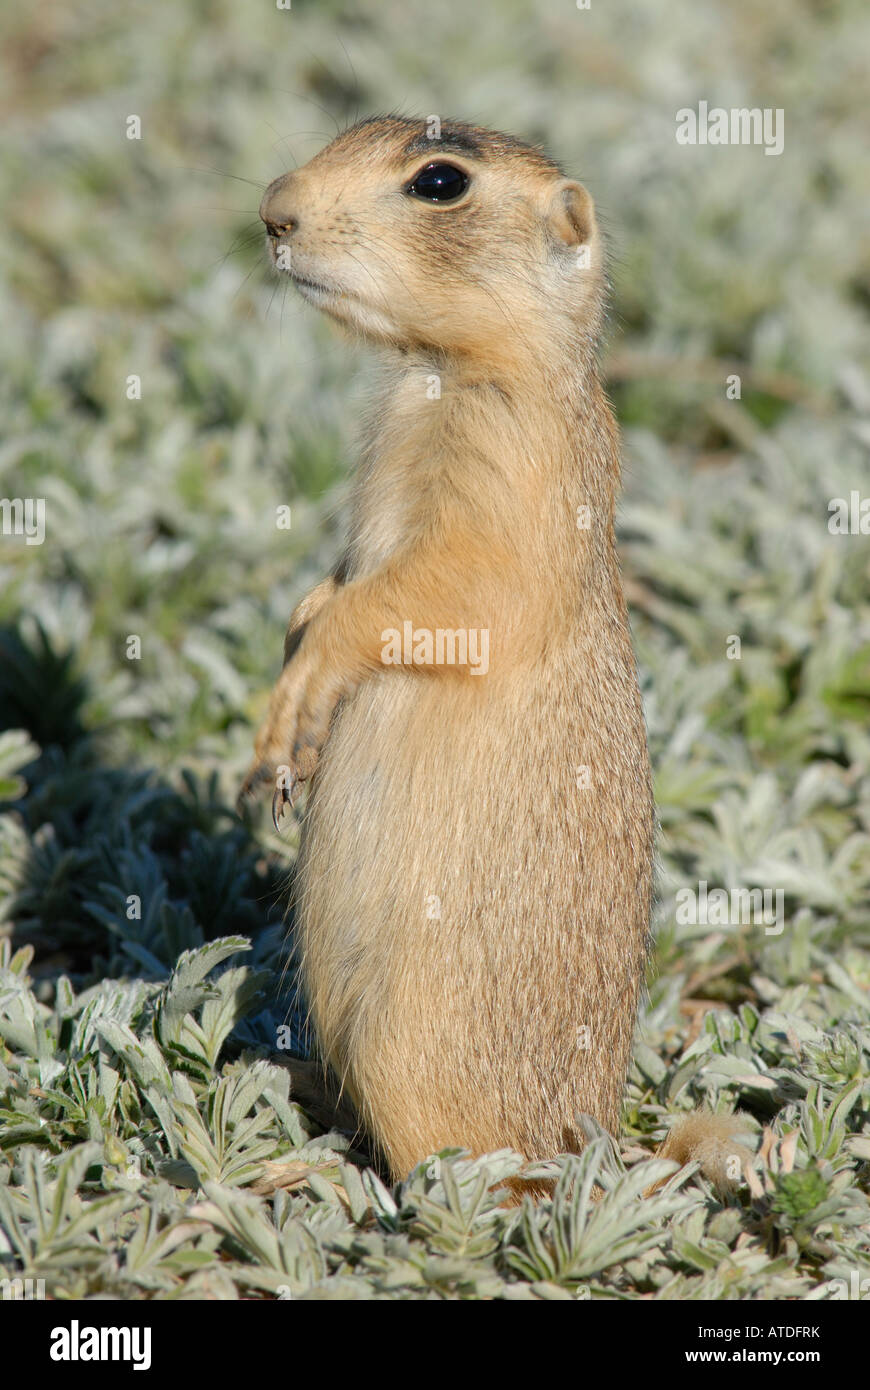 Stock photo of a young Utah prairie dog standing upright. Stock Photo